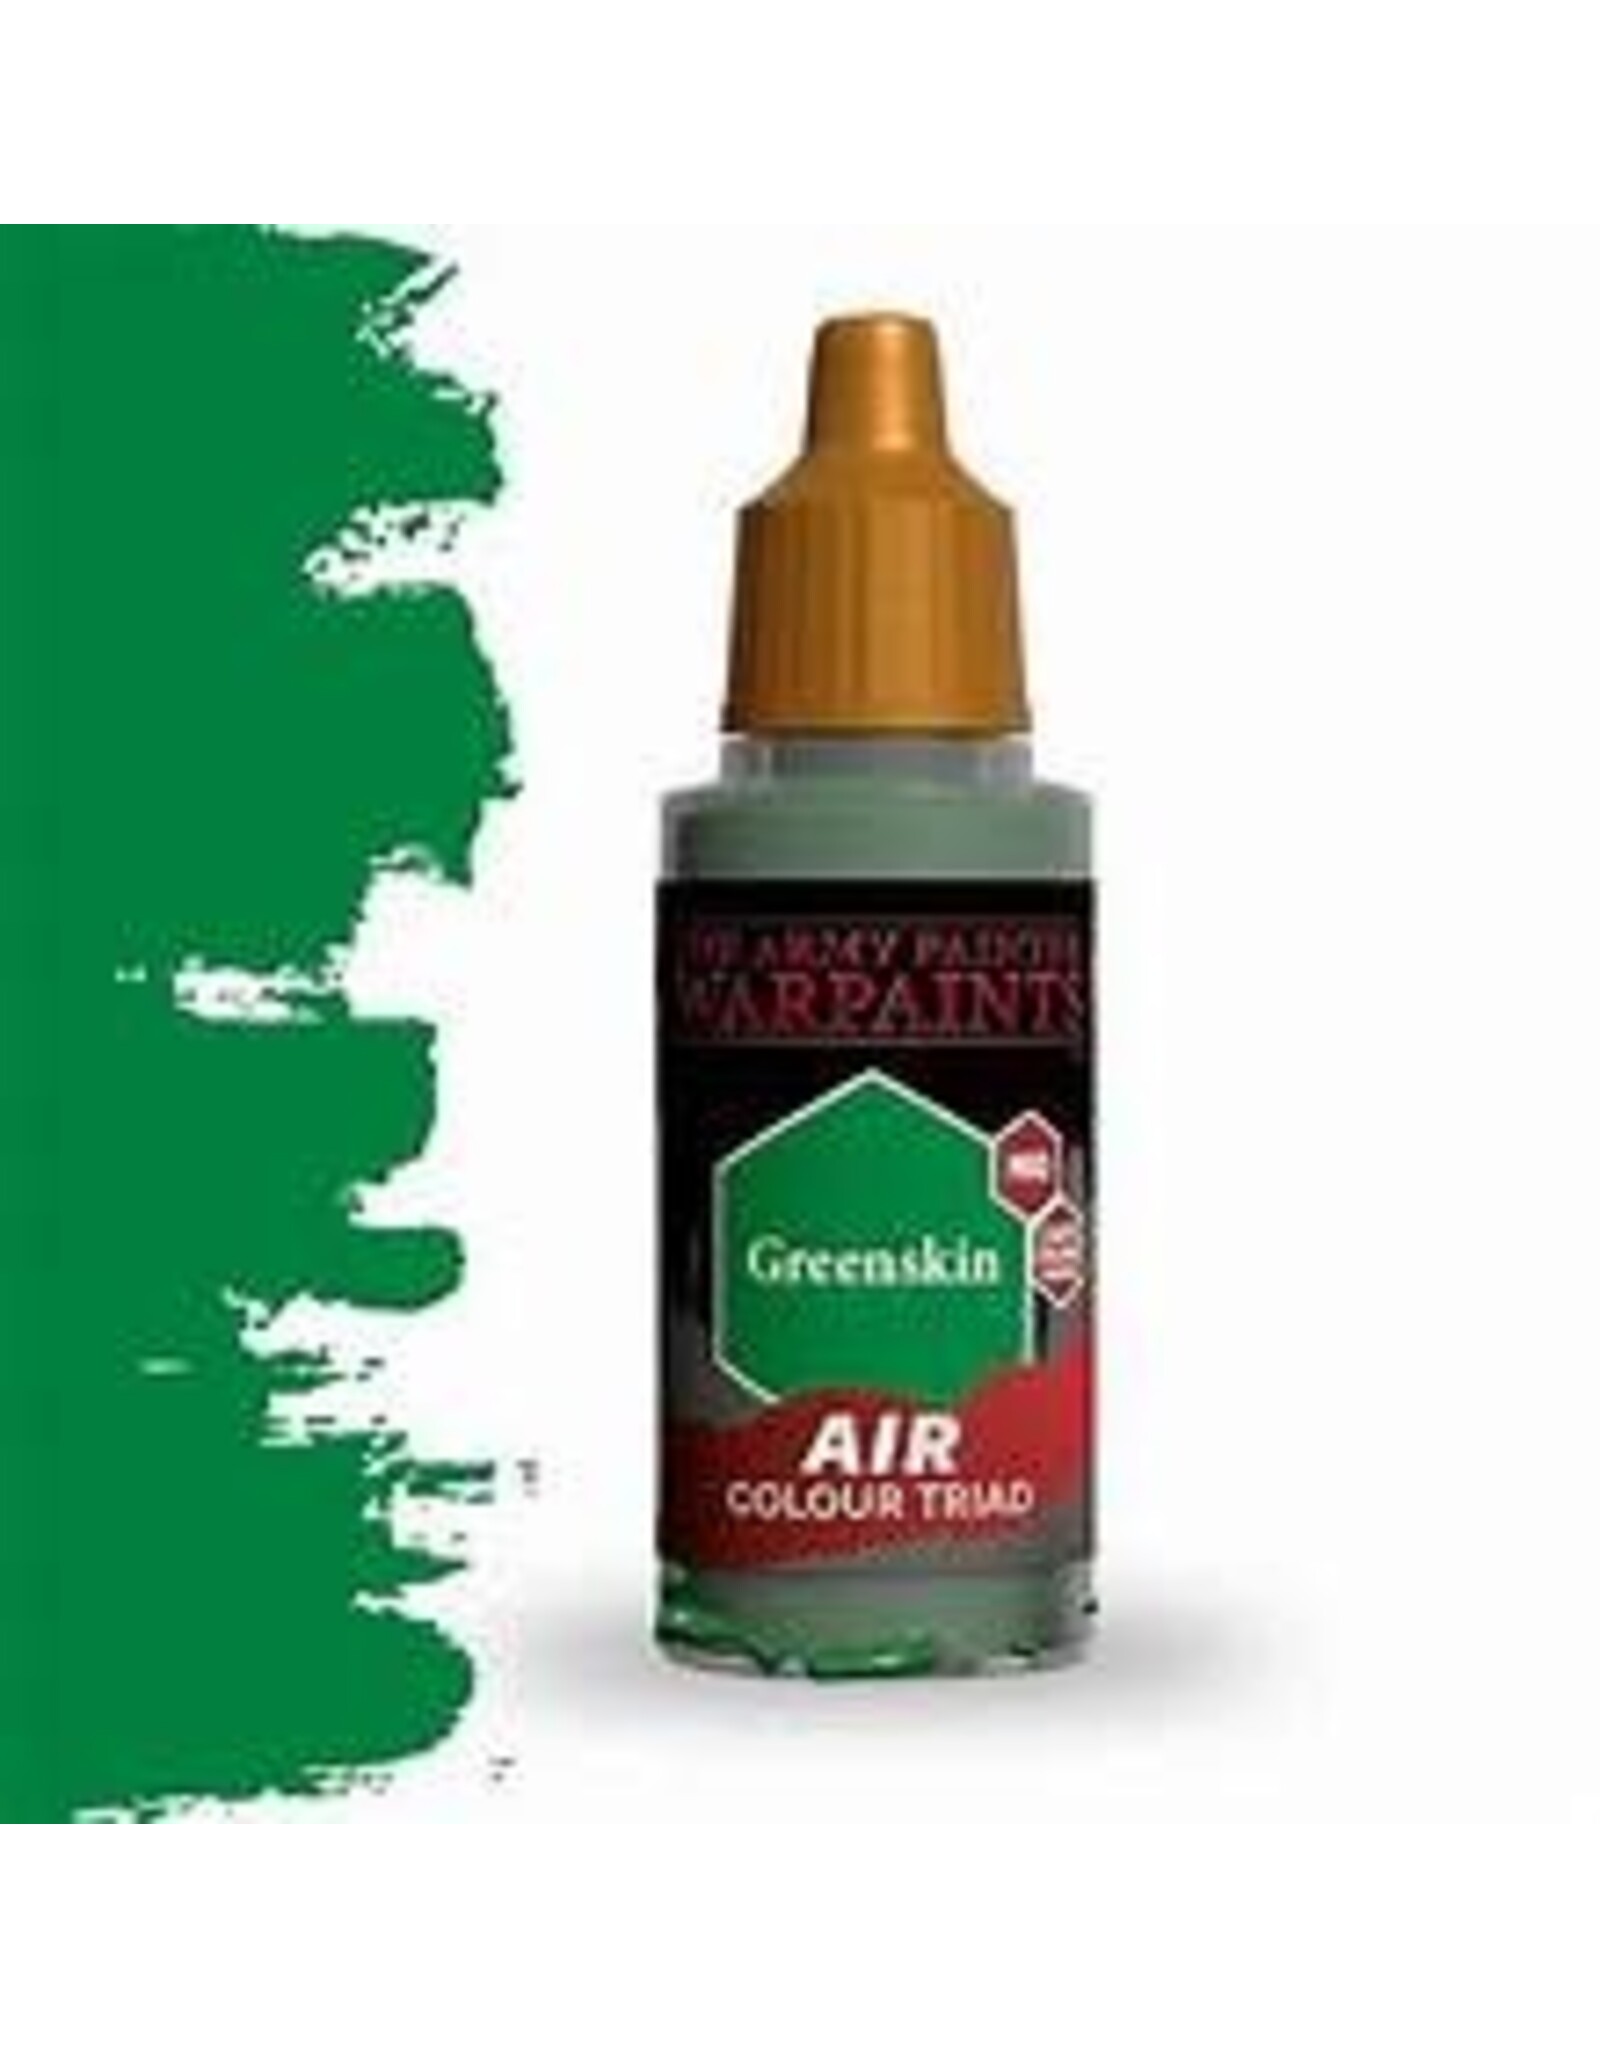 The Army Painter AW1111 Greenskin